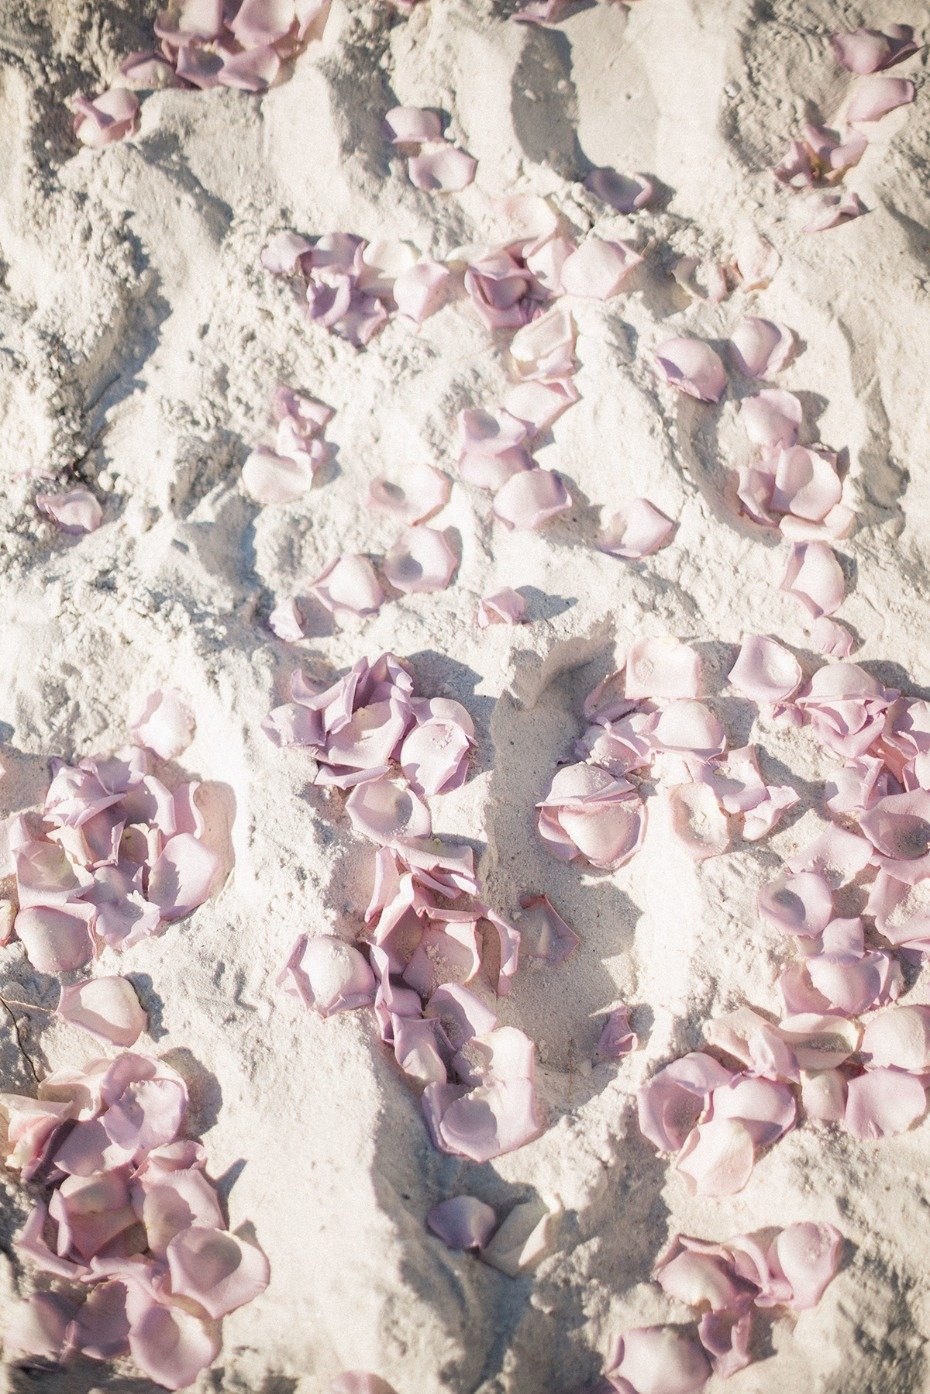 flower petals in the sand